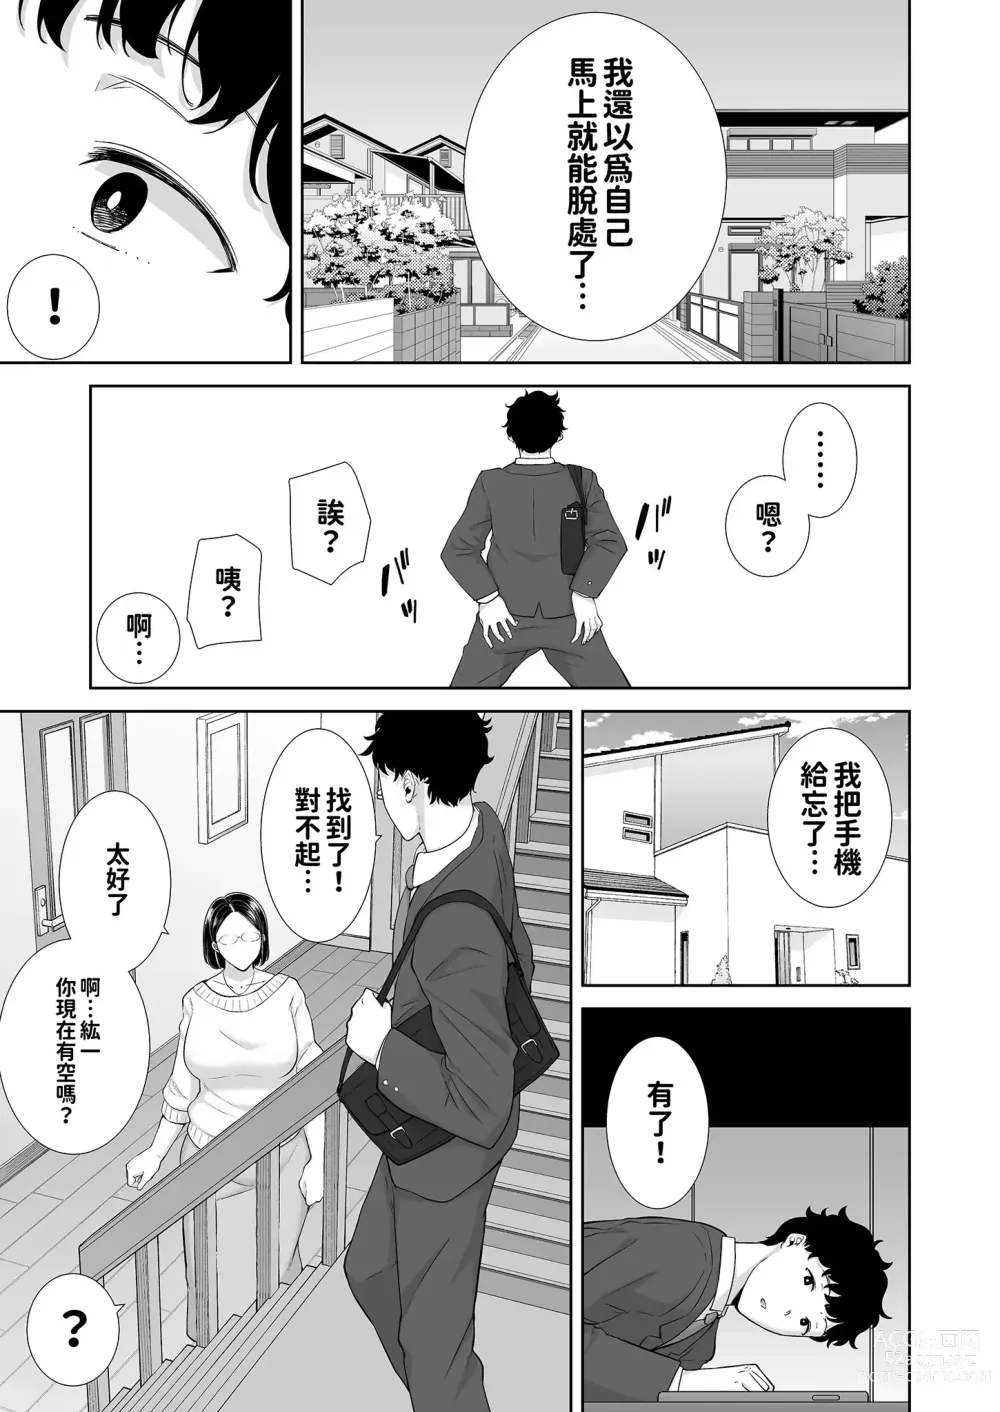 Page 10 of doujinshi KanoMama Syndrome 1 glass ver